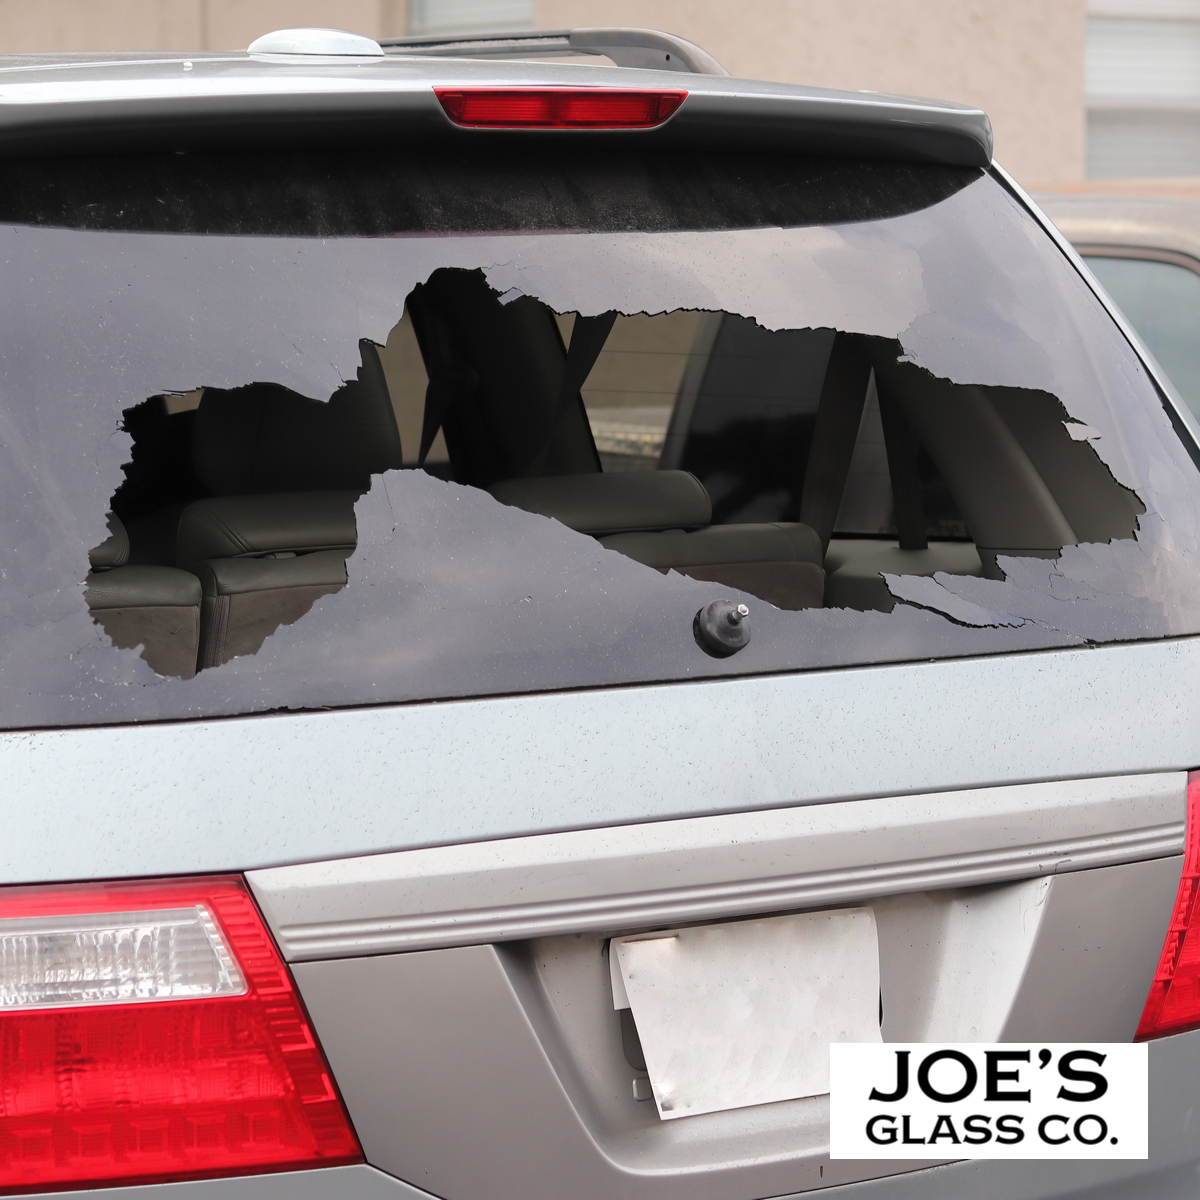 Is Joe’s Glass Co. Equipped to Handle Auto Back Glass Replacement for Mercer Island Commuters?